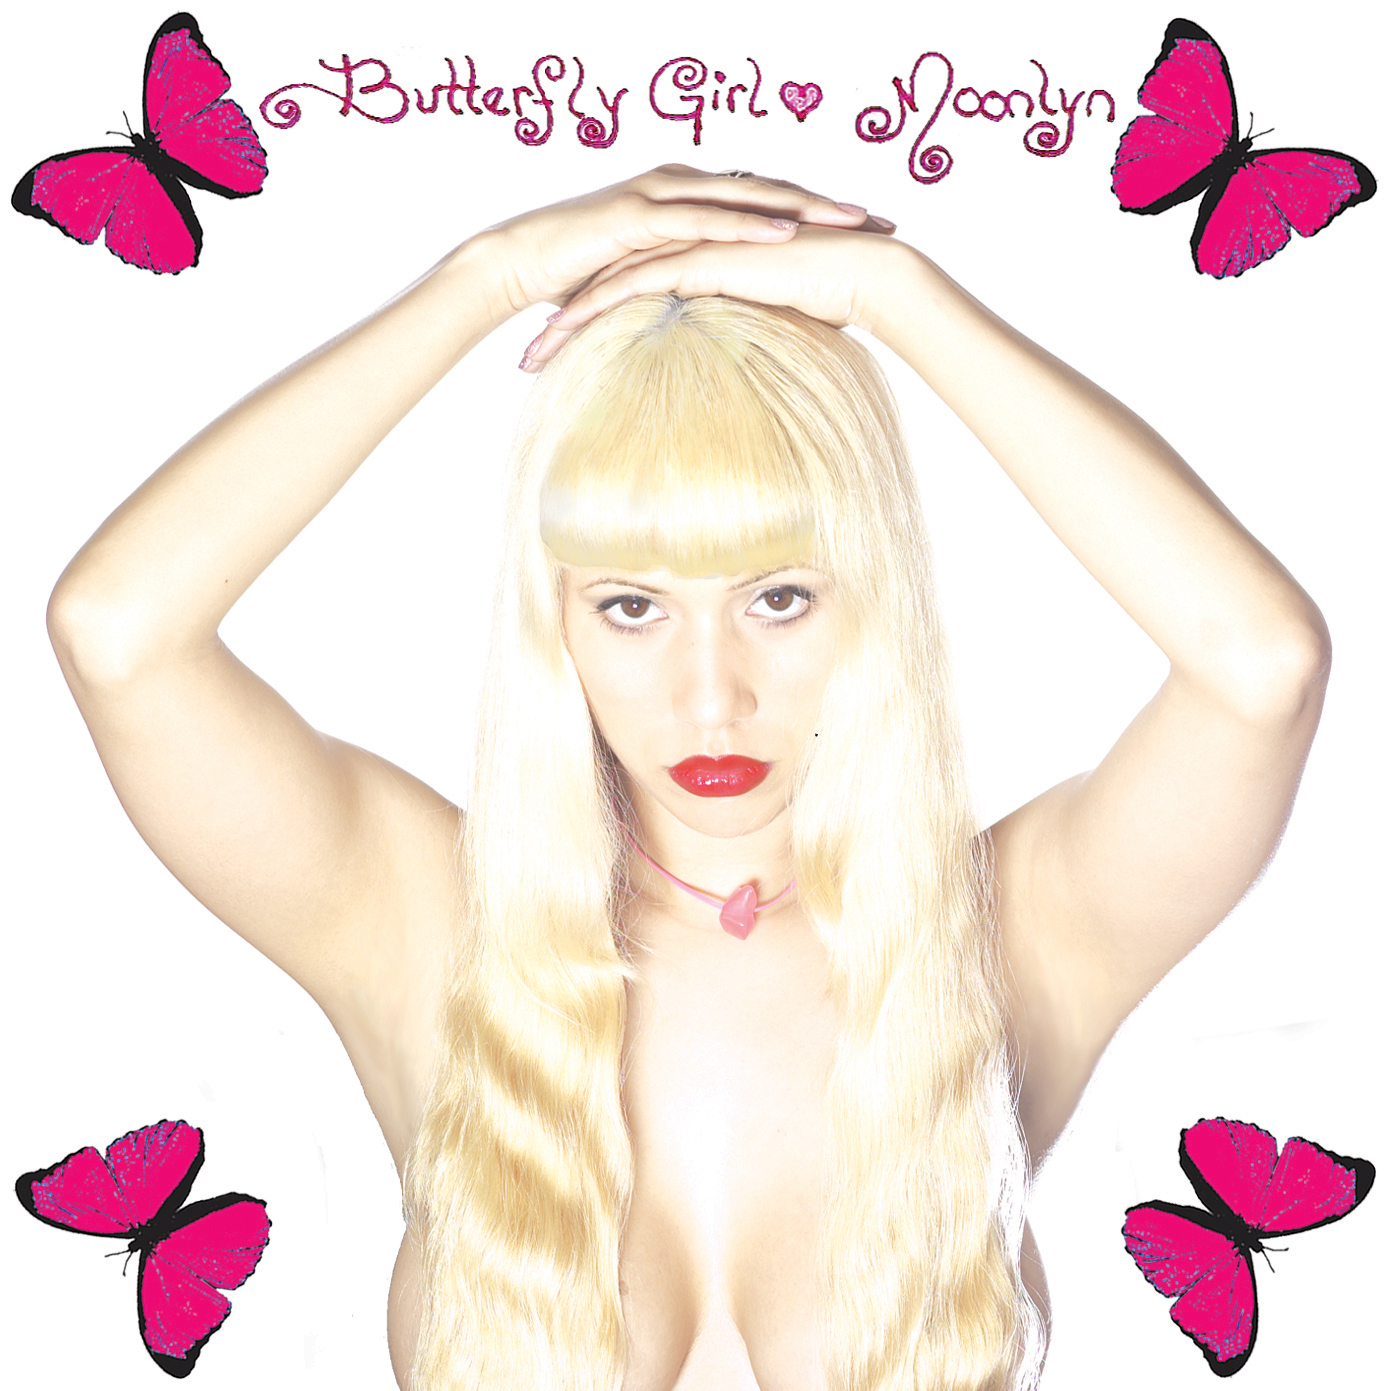 Butterfly_Girl_Album_Cover.jpg Moonlyn, Bob Marley, Cover Song, Three Little Birds, 3 Little Birds, Don't Worry About A Thing, Happiness, La la la Song, Angels Sing Peace, Angel music, Angellic song, Peace Song, Blondes Prefer Gentlemen, Storm, Fairy Tale, Lolita, Lolita Your Beauty Can Kill, Butterfly Girl, Moonlyn, Butterfly Girl song, Butterfly Girl album, Butterfly Girl music, Moonlyn music, Blondes Prefer Gentlemen, Gentlemen Prefer Blondes, Marilyn Monroe Cover Song, I Wanna Be Loved By You, Jayne Mansfield Look-a-like, blonde bombshell, Silent Night